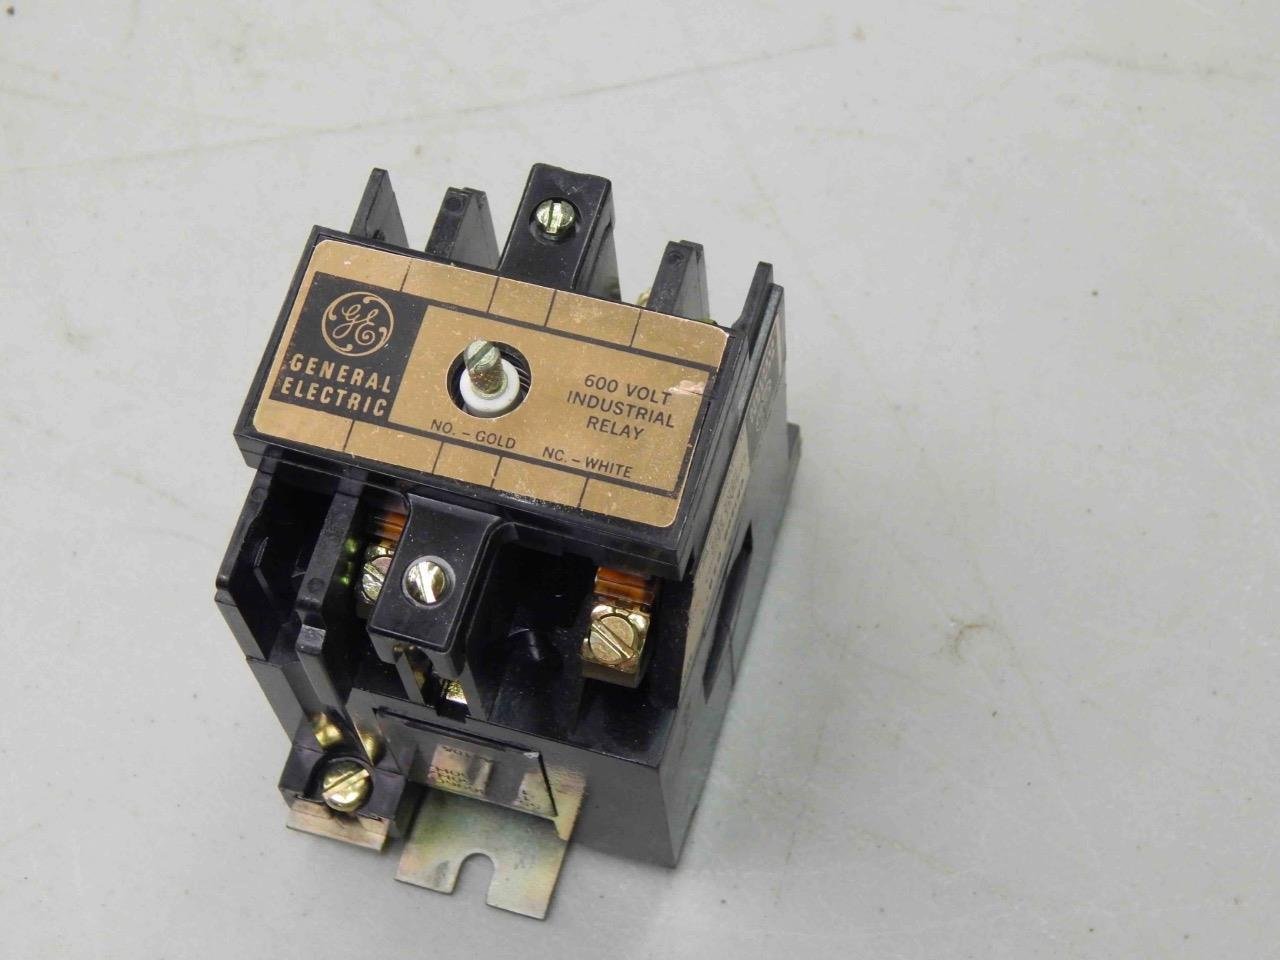 Details about   NEW GE GENERAL ELECTRIC CR120B044 INDUSTRIAL RELAY 110/120V COIL 